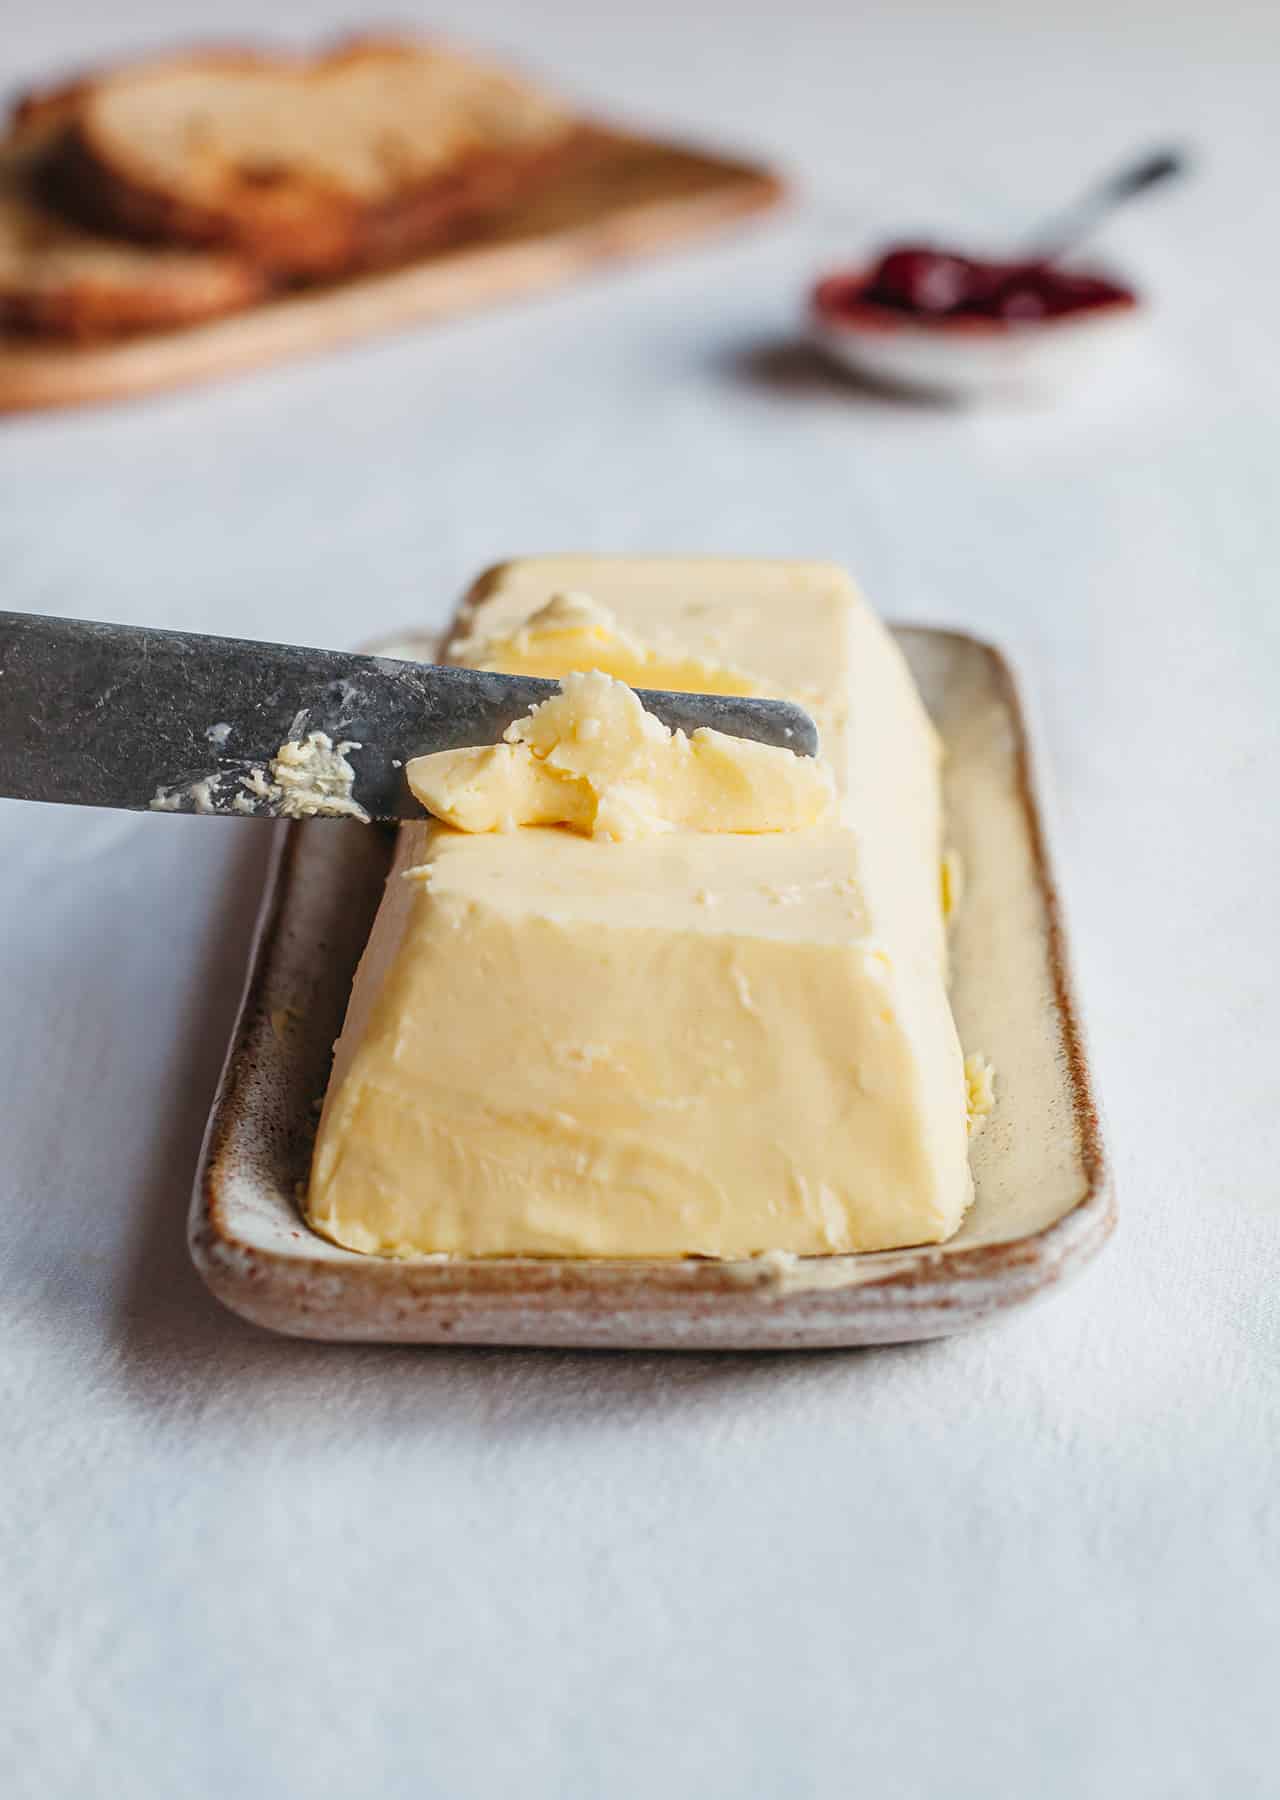 How To Make Vegan Butter